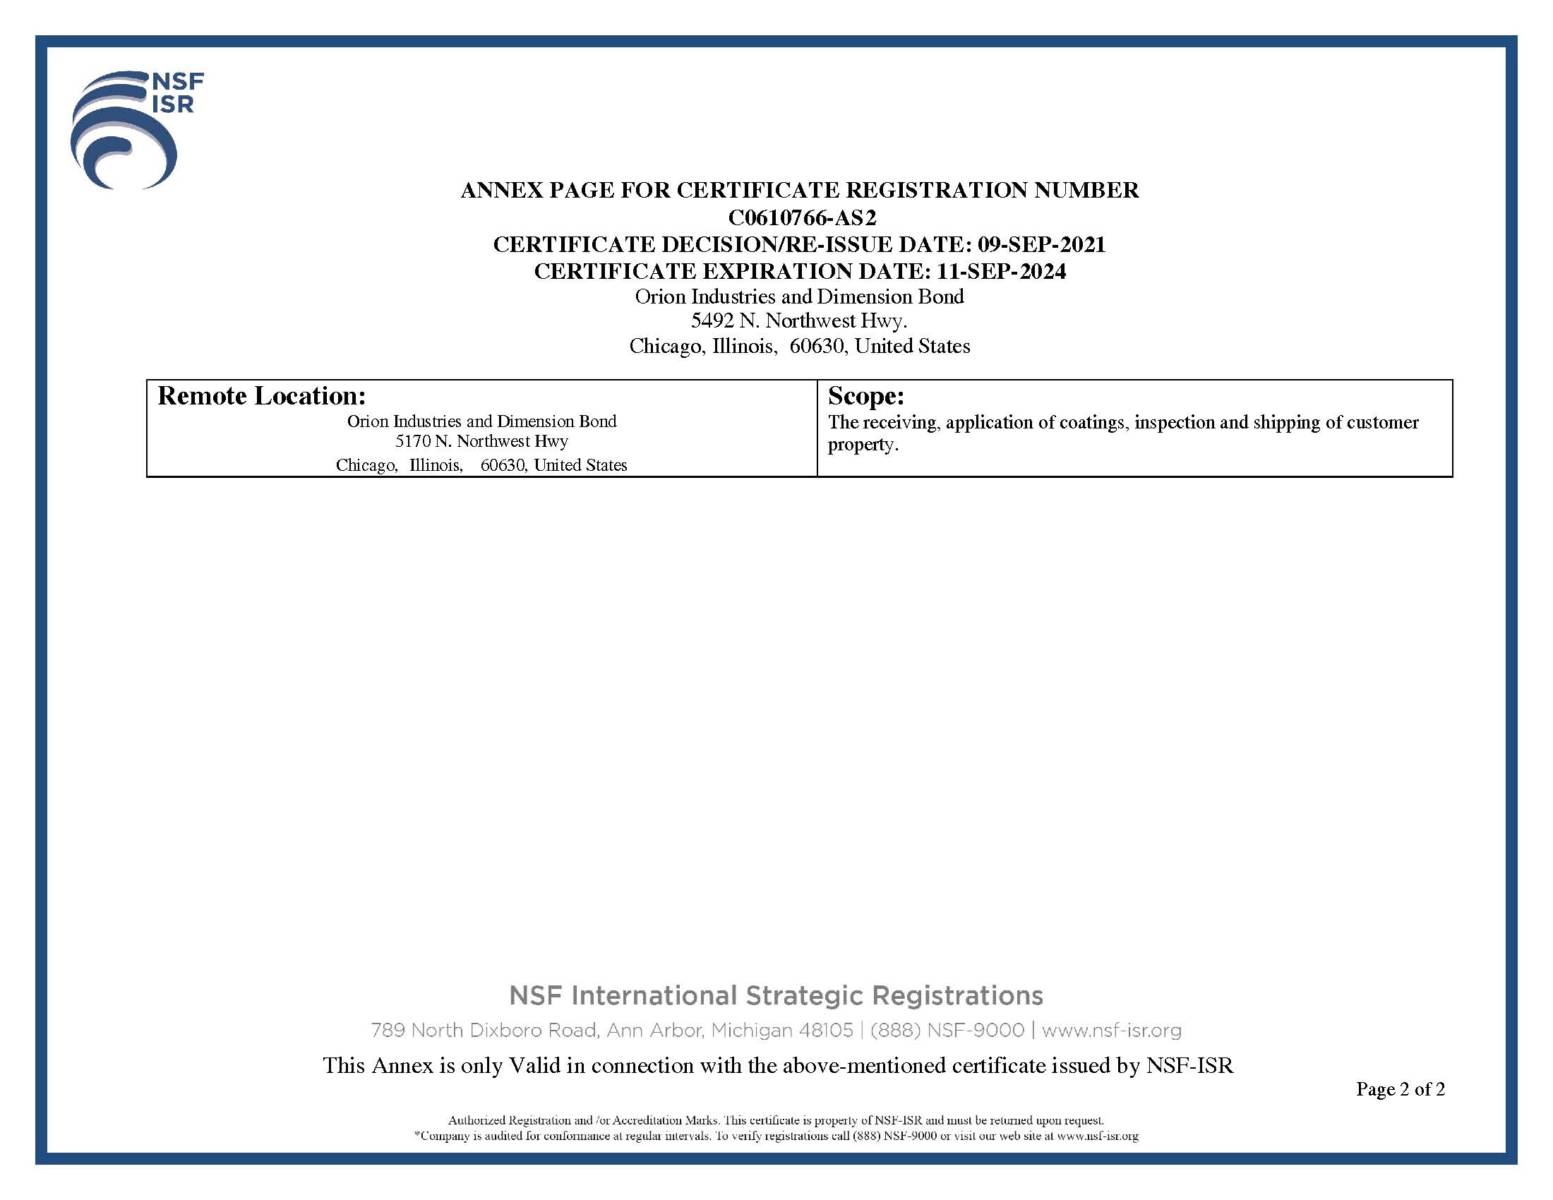 NSF AS9100D certificate page 2